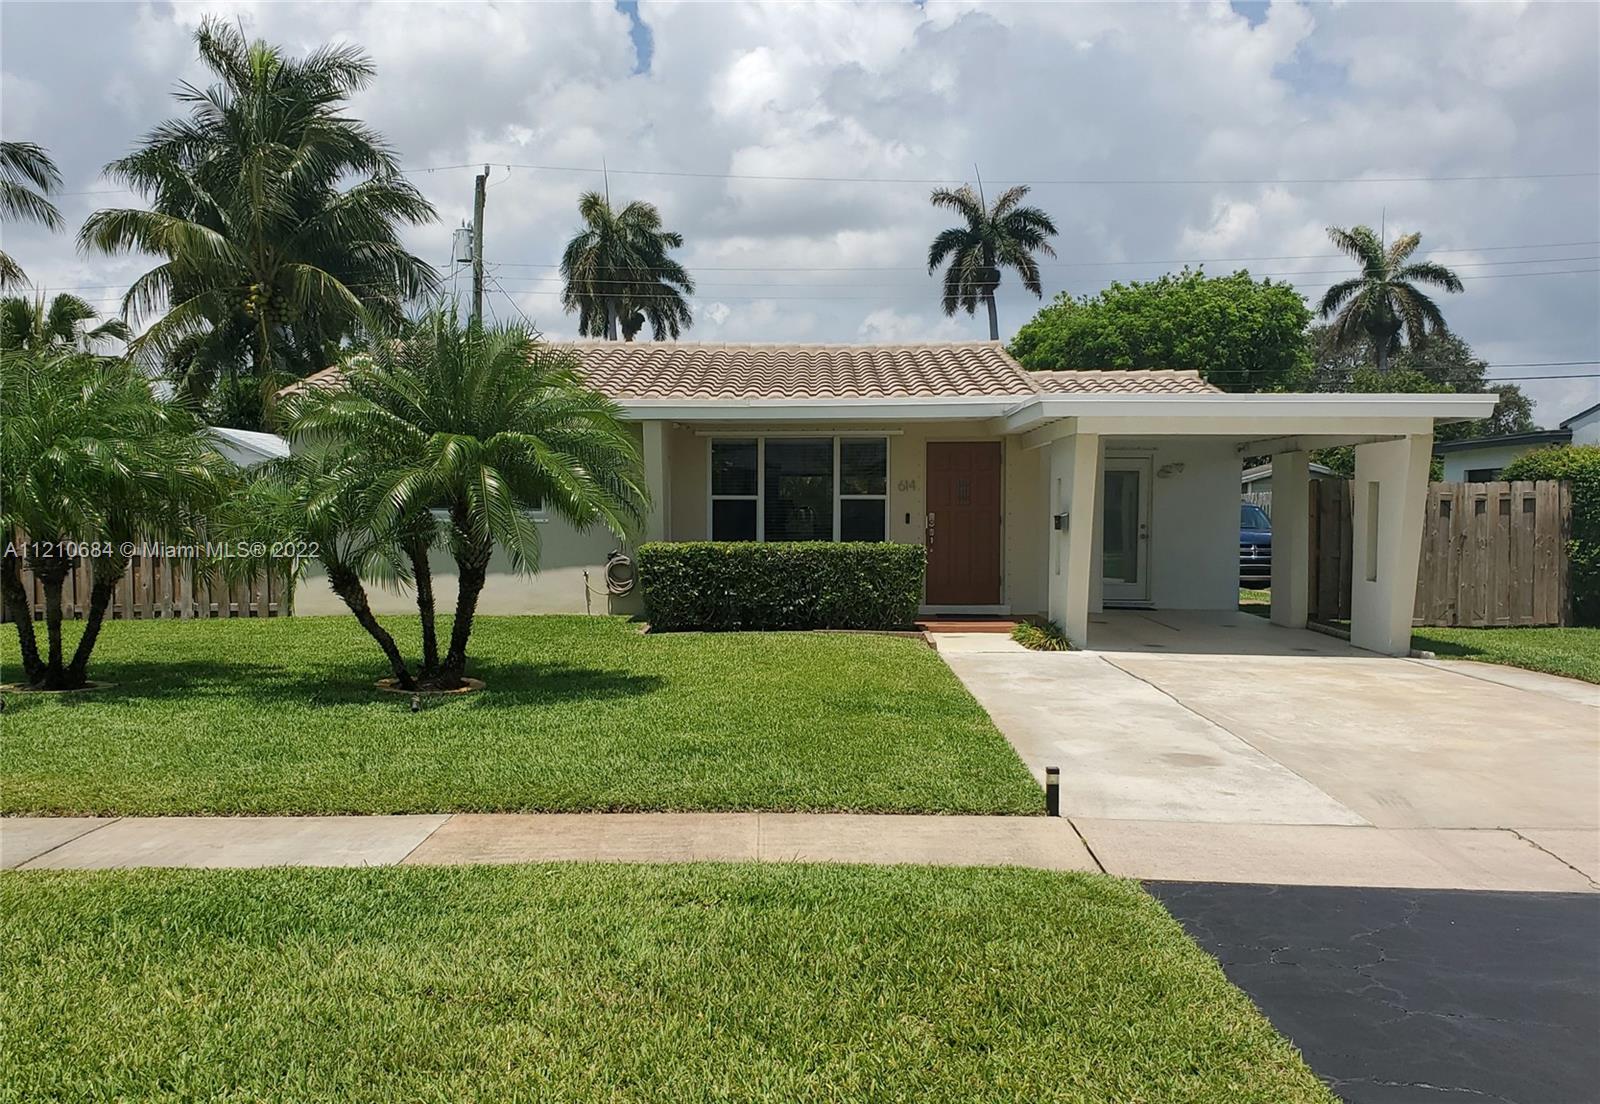 614 N 31st Ave  For Sale A11210684, FL